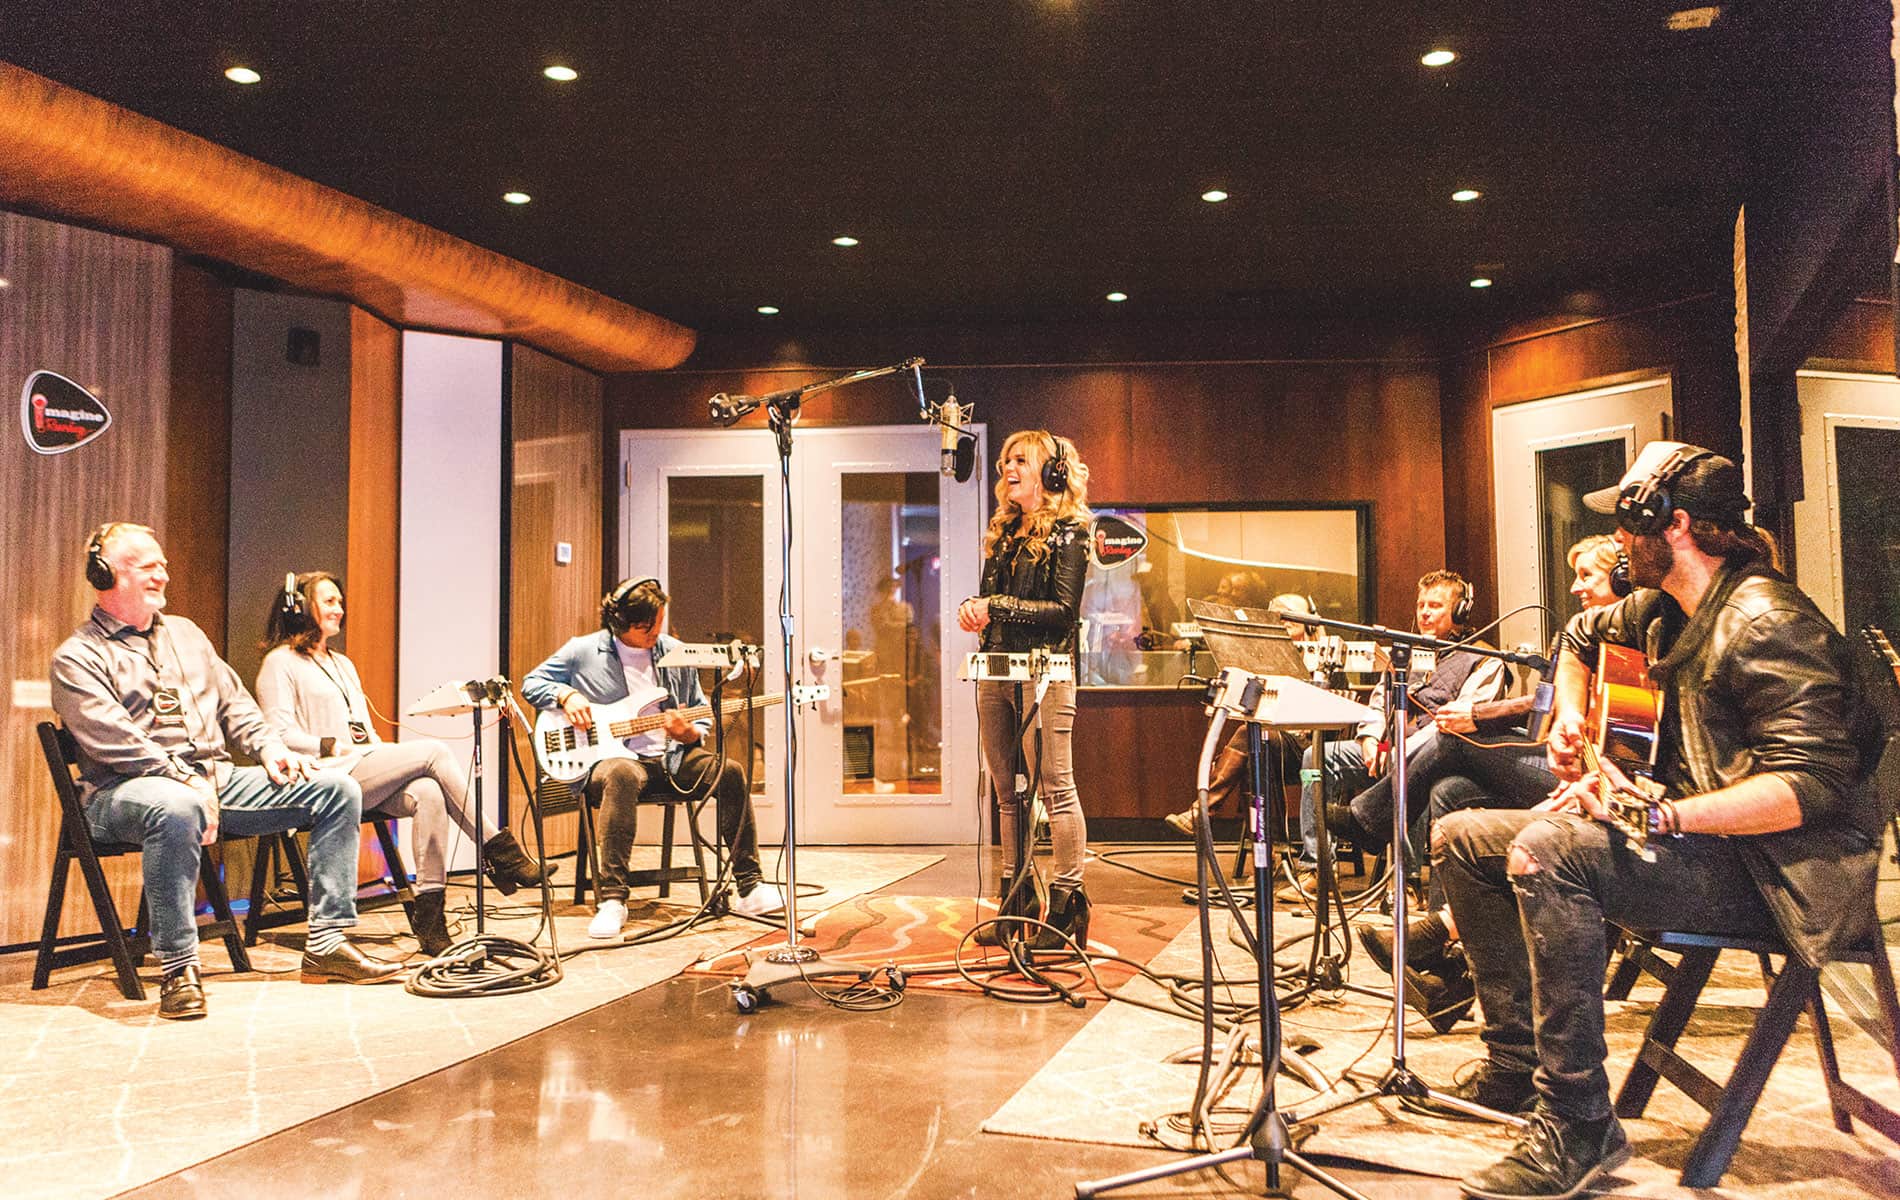 Recording artist Natalie Stovall sings a new song during a live Imagine Recordings session with studio musicians while attendees listen through headphones.